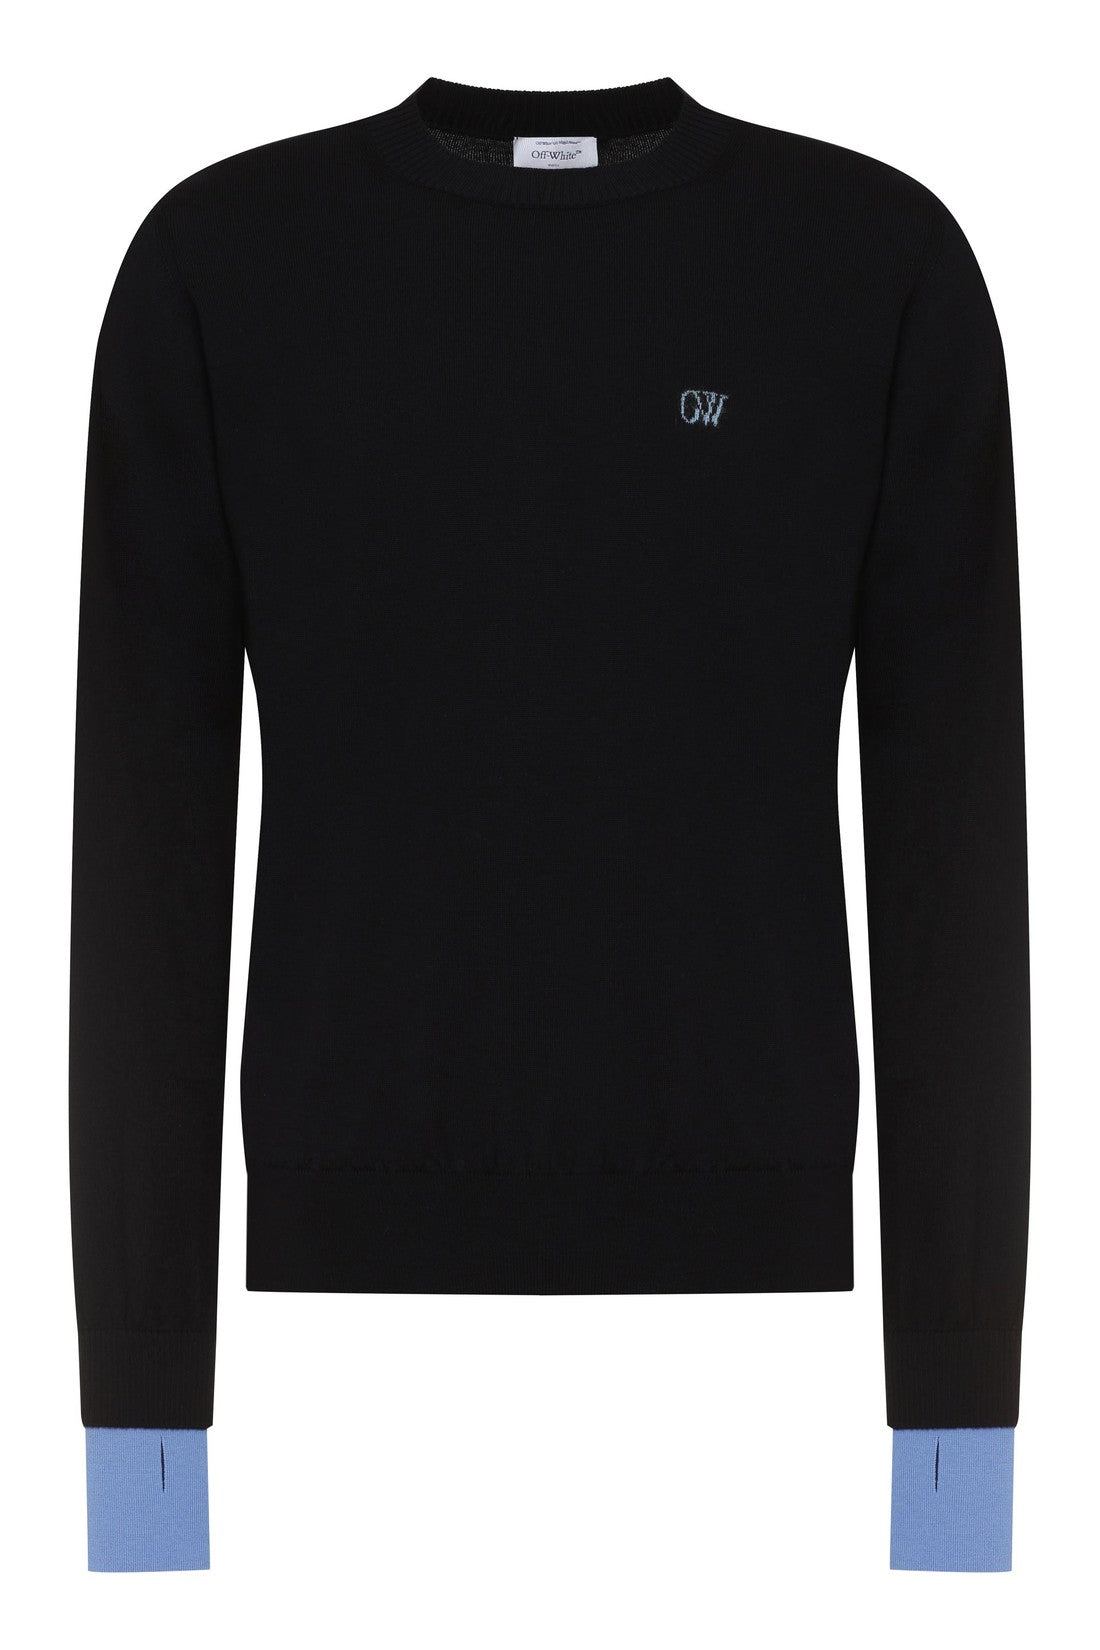 Off-White-OUTLET-SALE-Knit wool pullover-ARCHIVIST